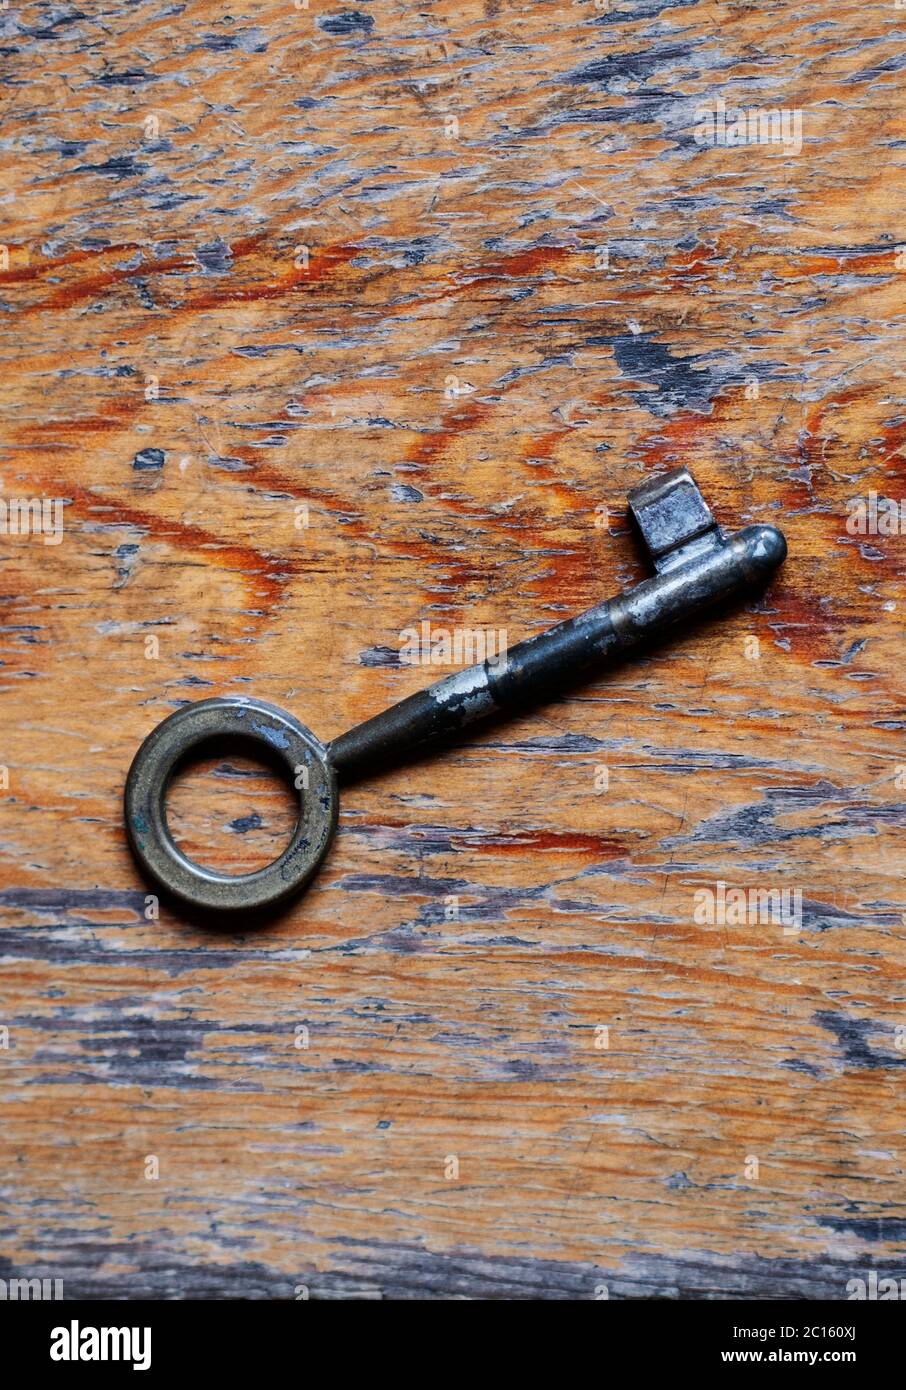 Old key on a worn out hardwood floor Stock Photo